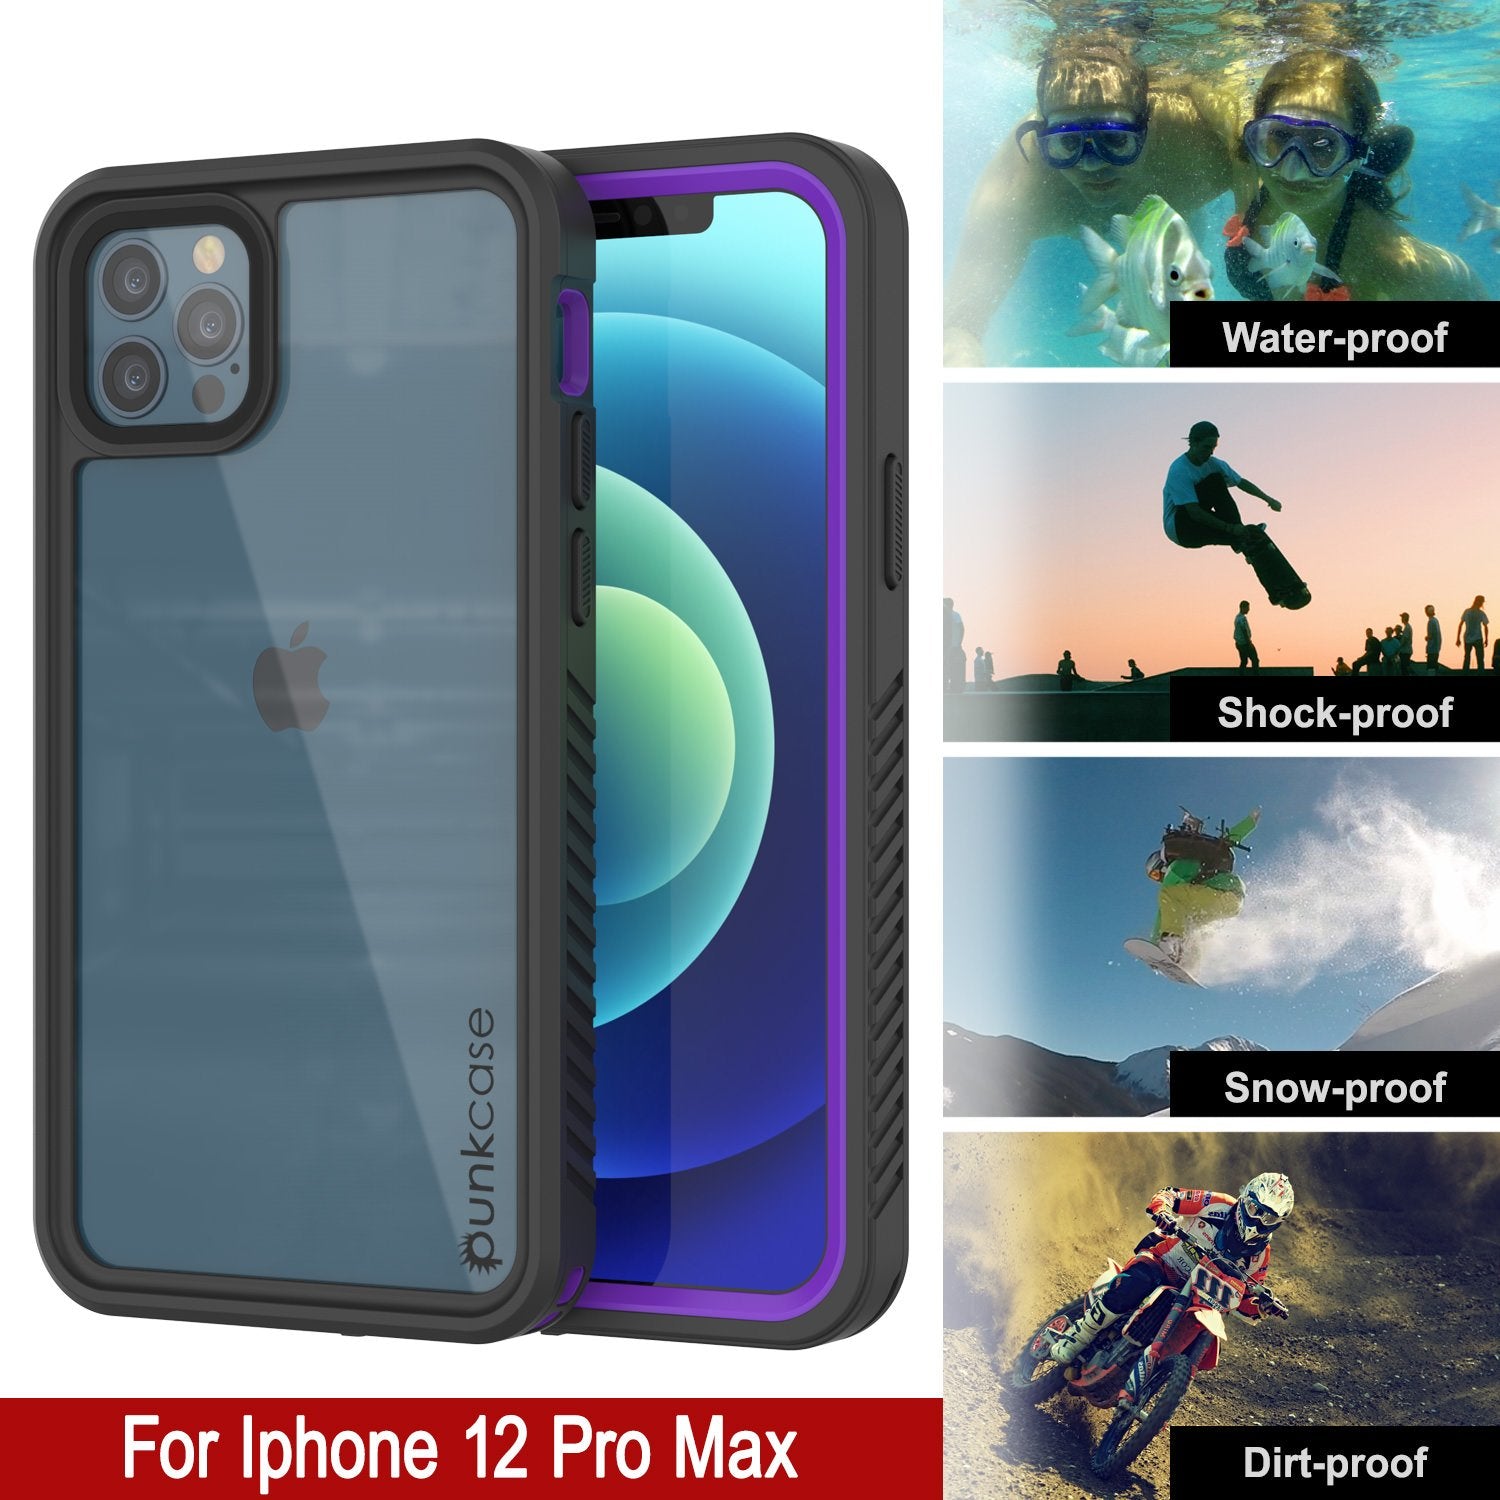 iPhone 12 Pro Max Waterproof Case, Punkcase [Extreme Series] Armor Cover W/ Built In Screen Protector [Purple]